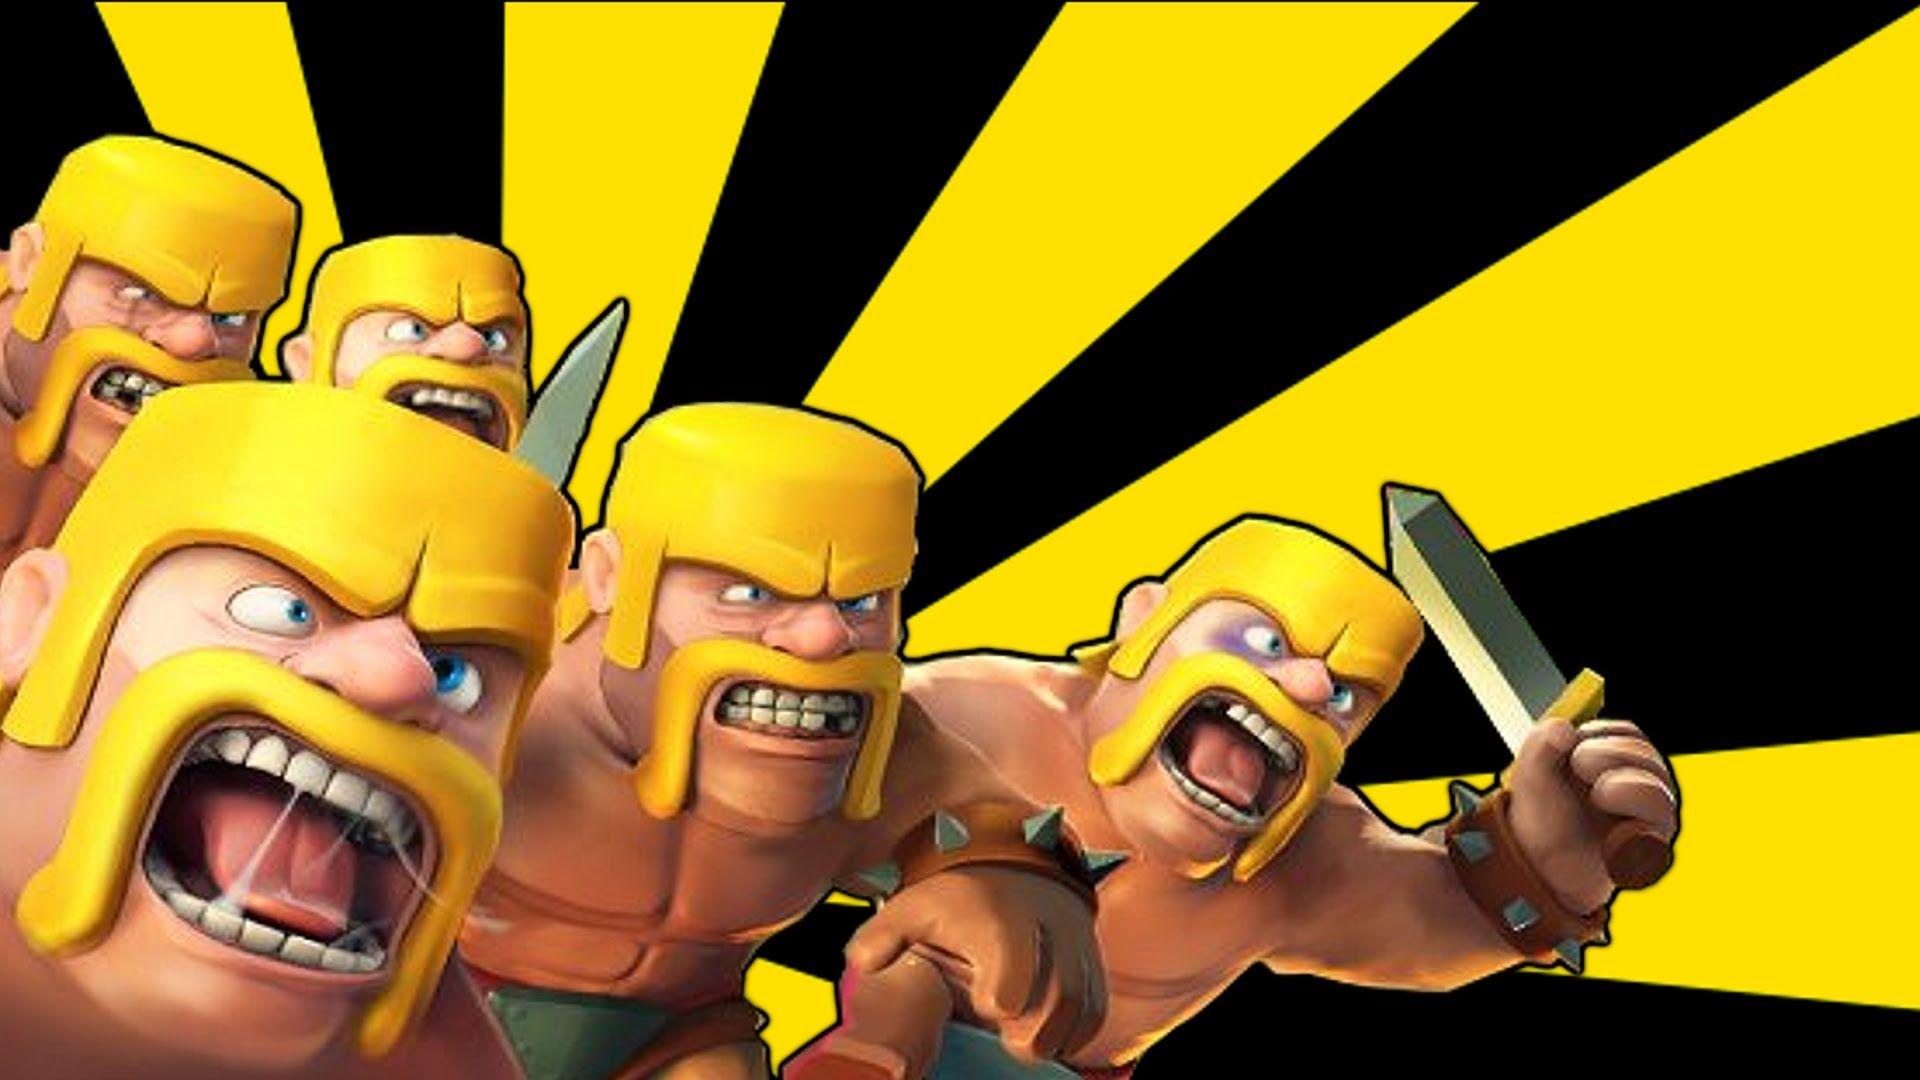 Clash of Clans Barbarian Wallpaper. Free